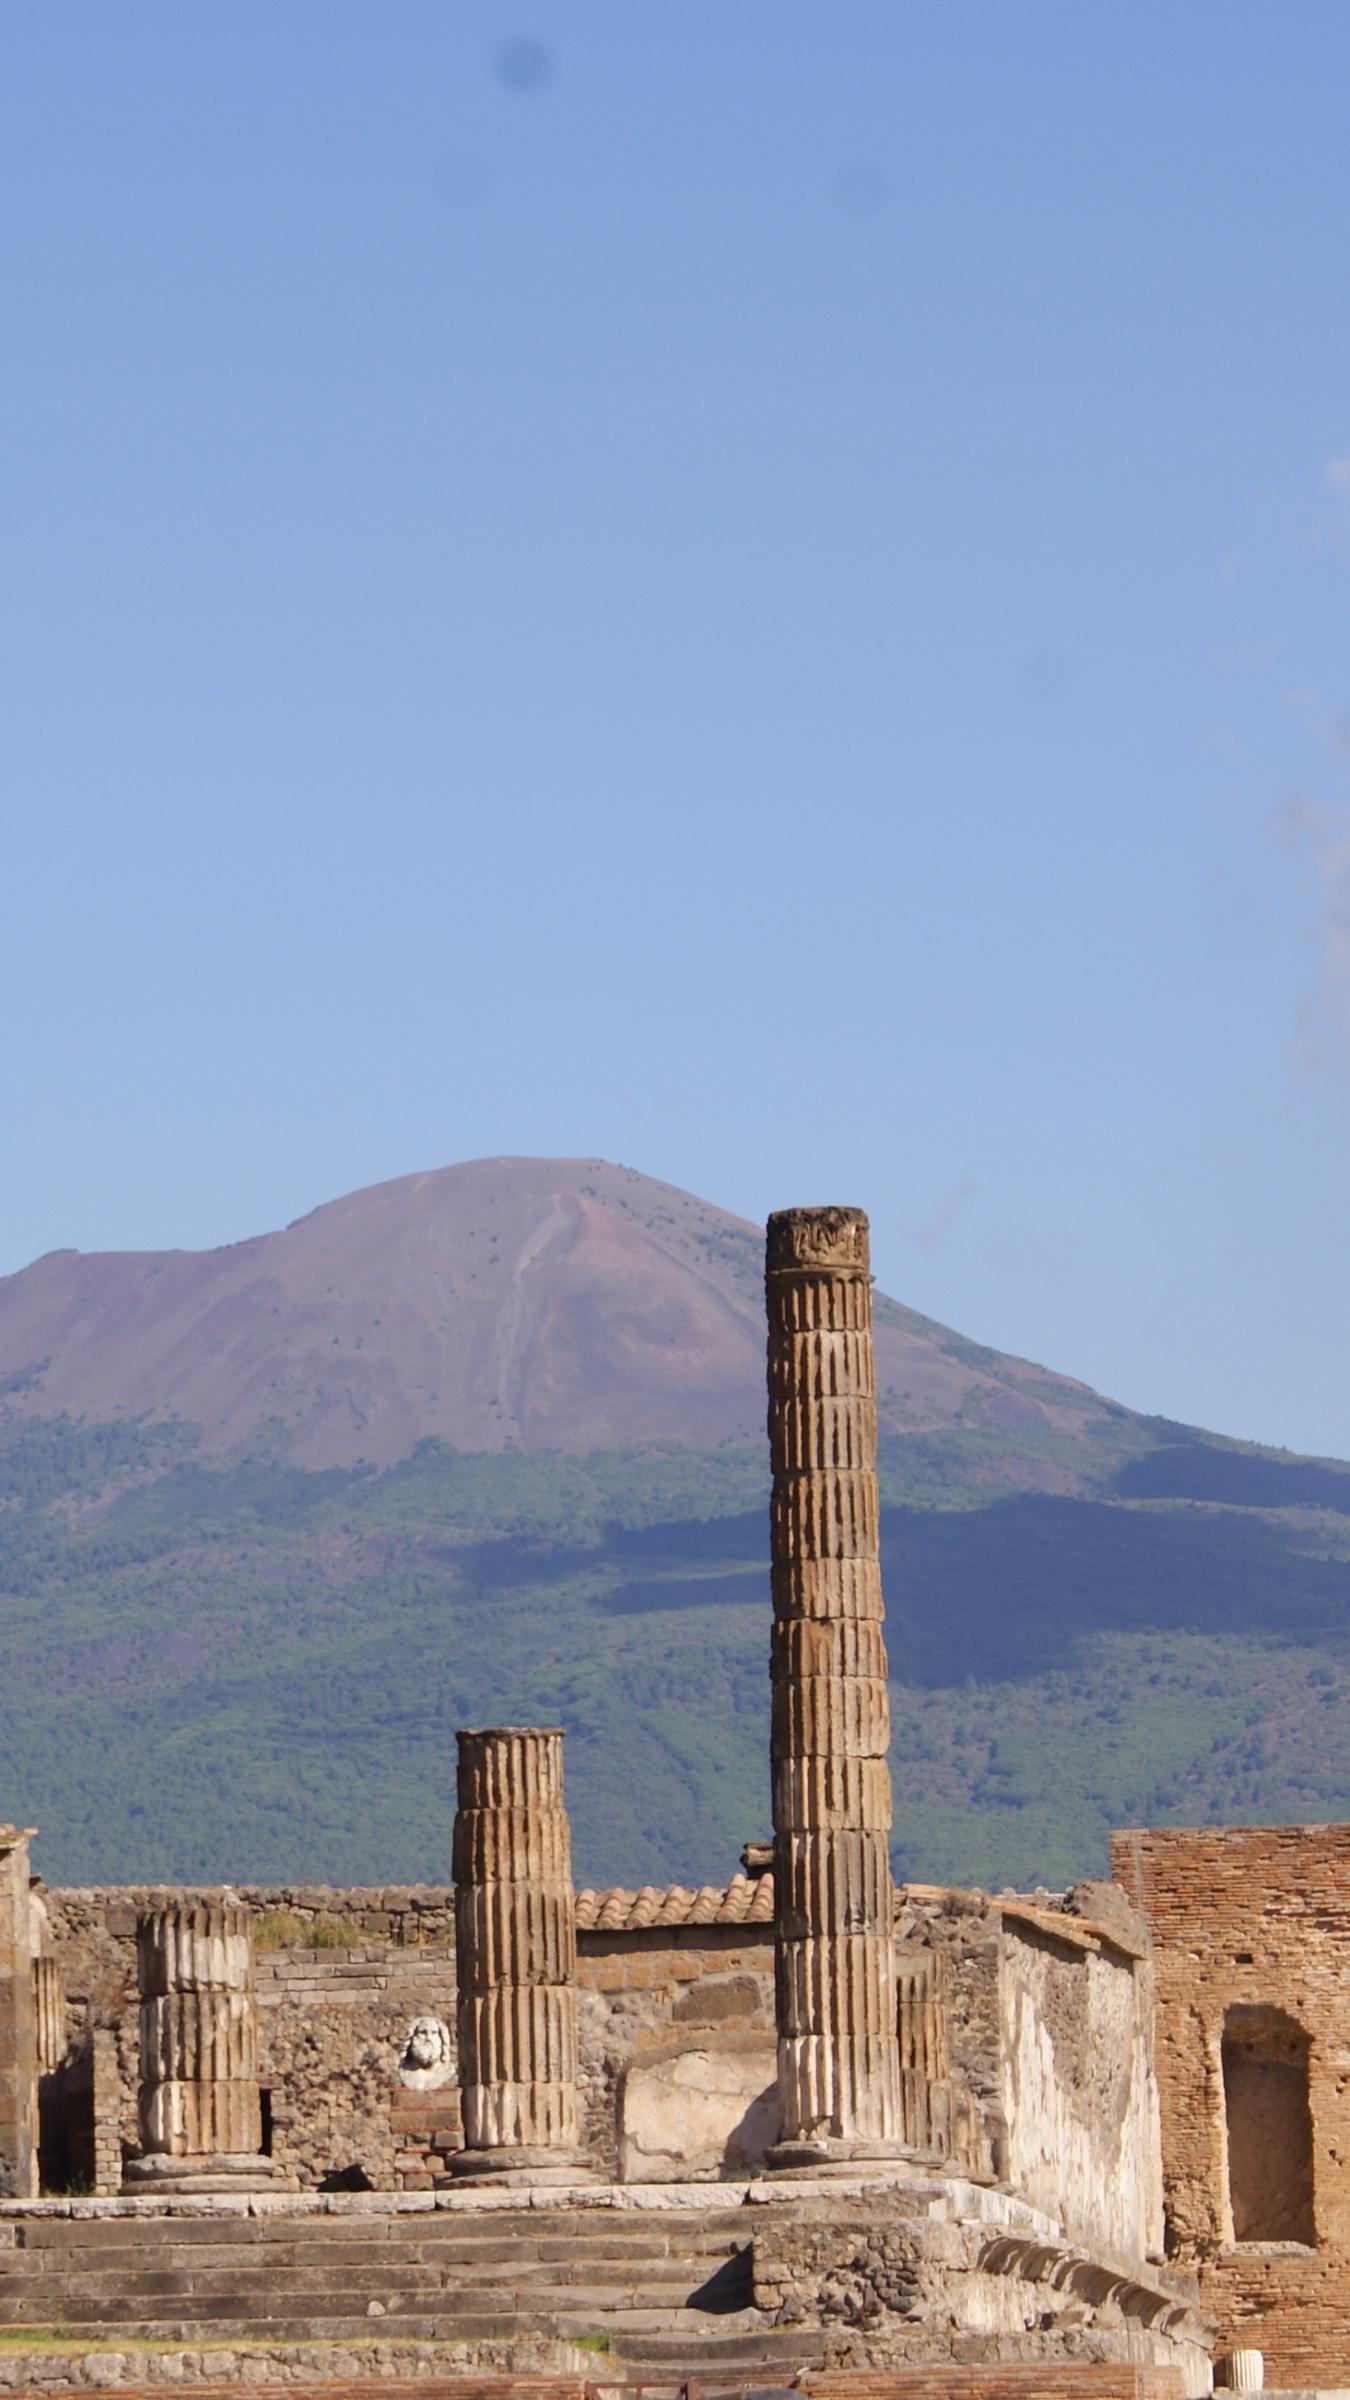 Download wallpaper 1350x2400 pompei, italy, ruins iphone